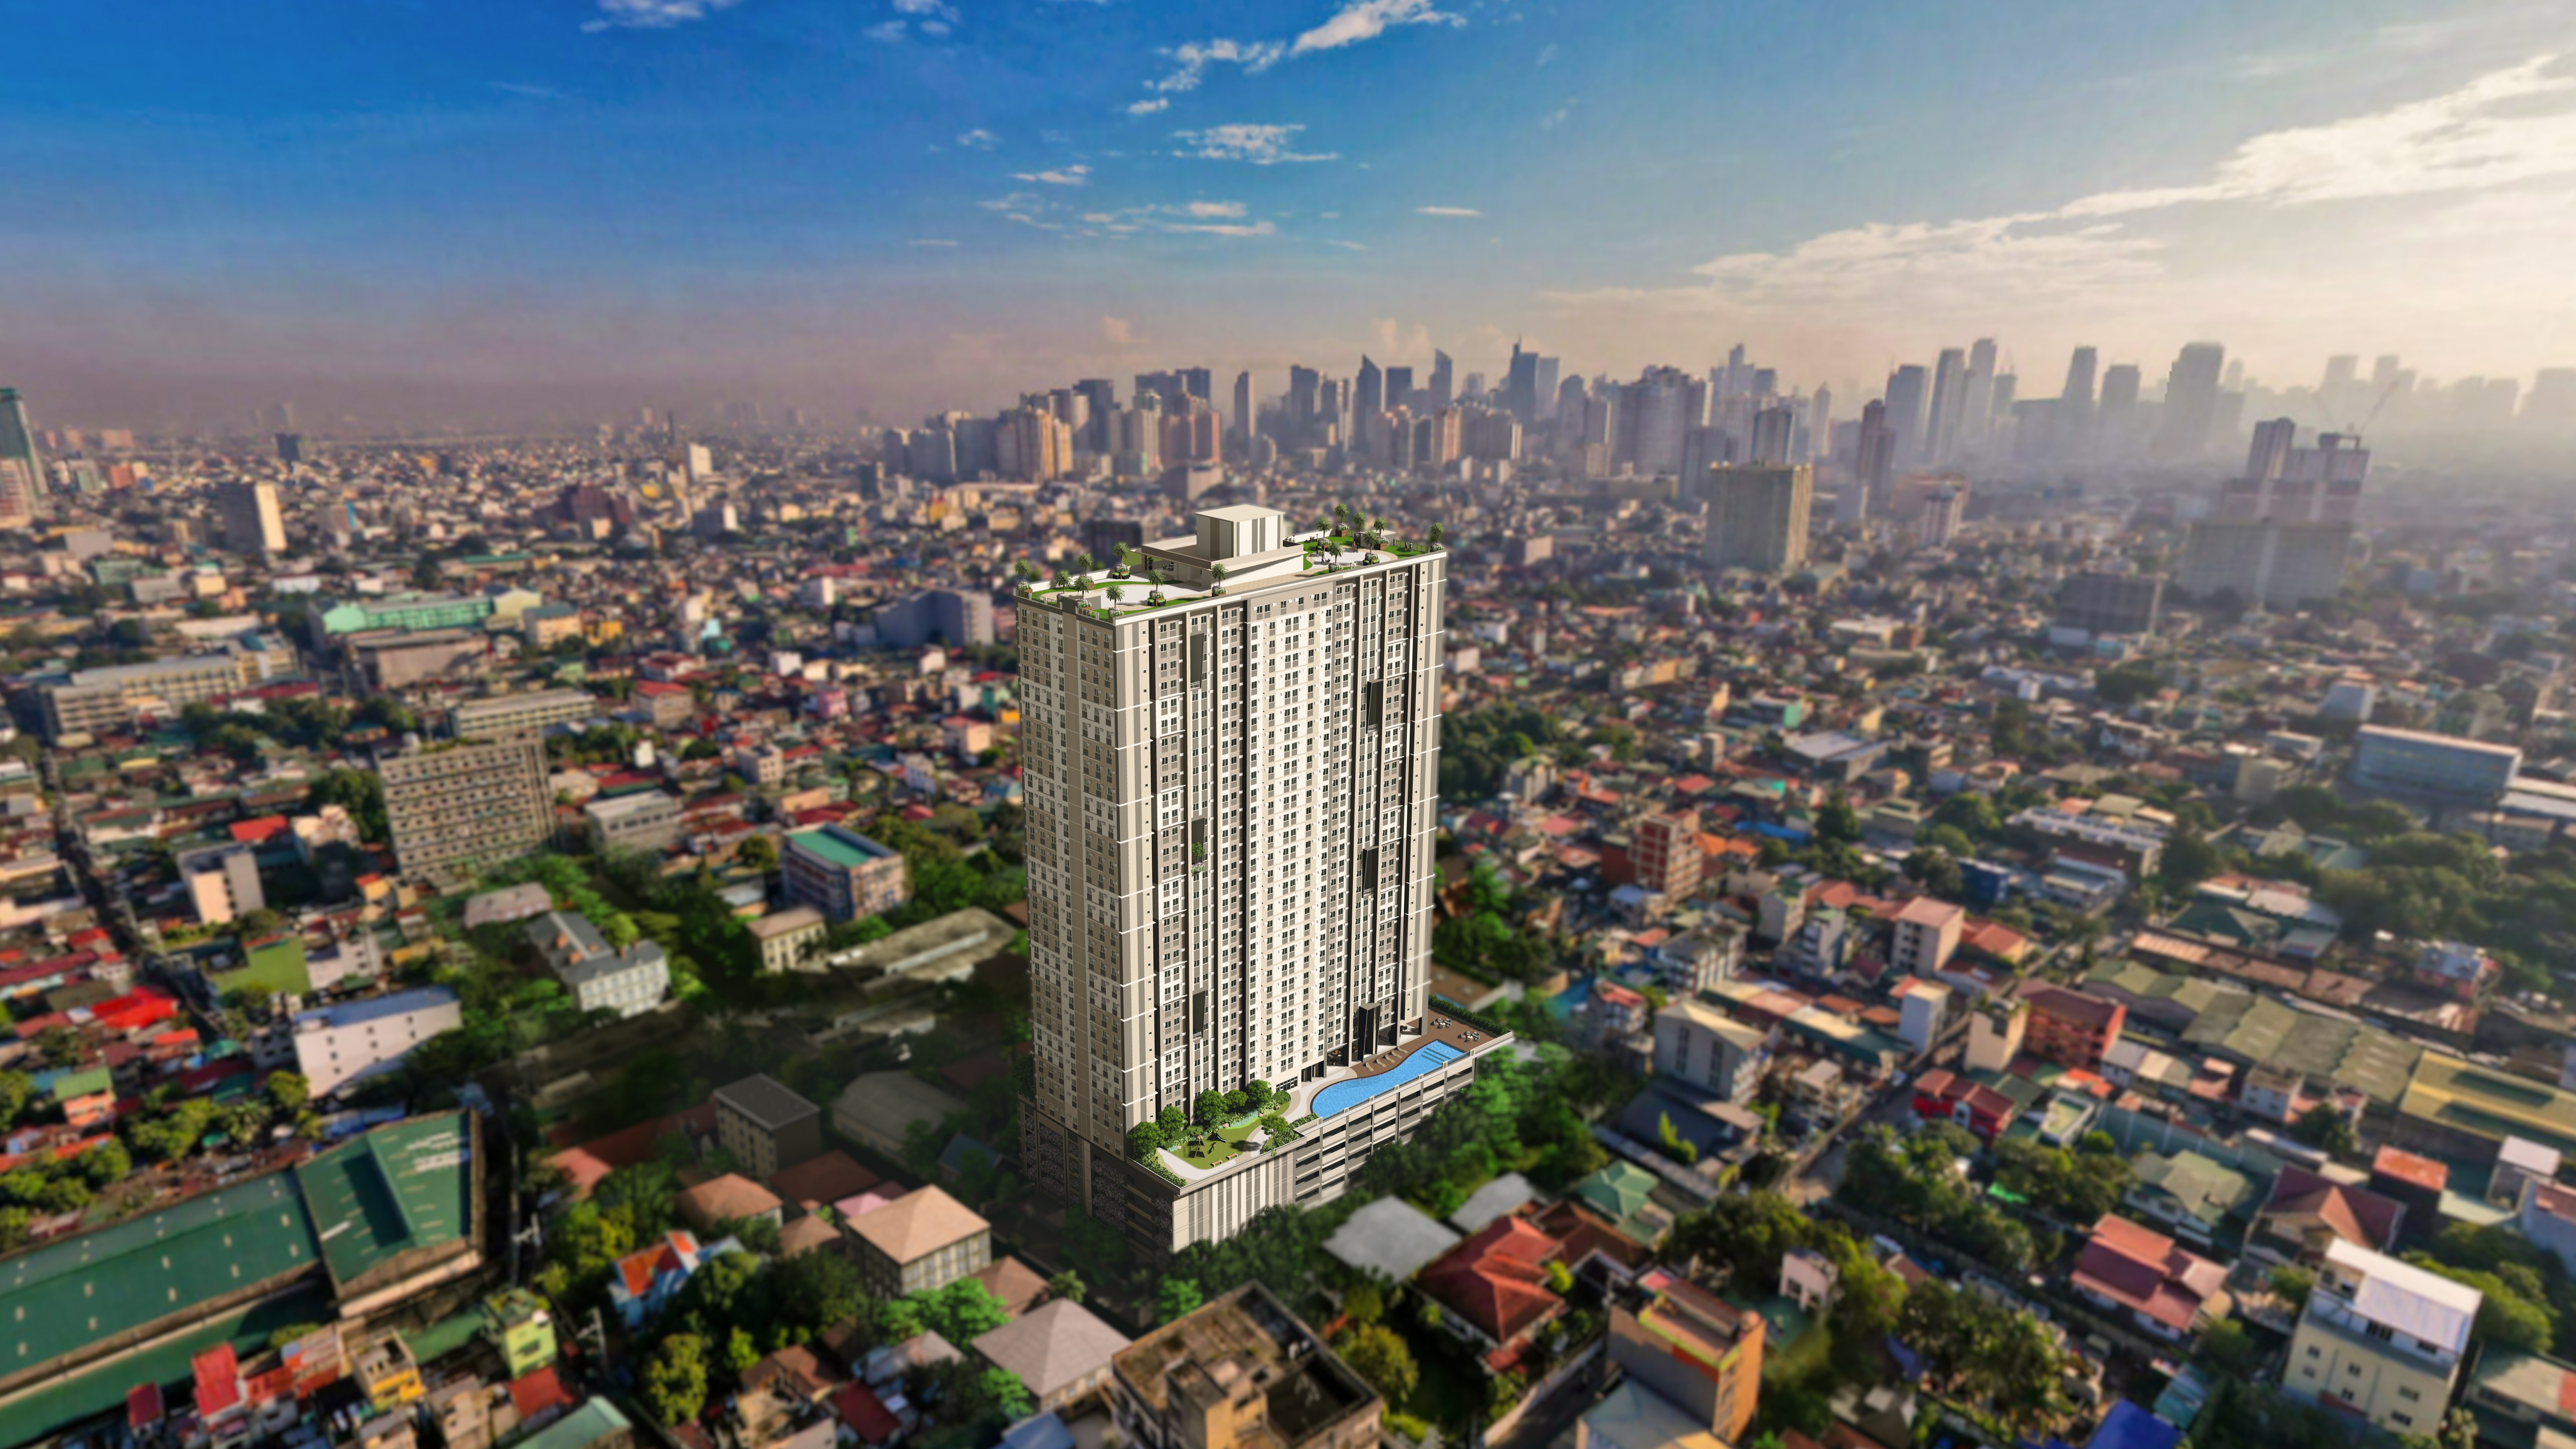 dmci-homes-anissa-heights-offers-an-accessible-quality-investment-home-in-pasay-city-1698981717747